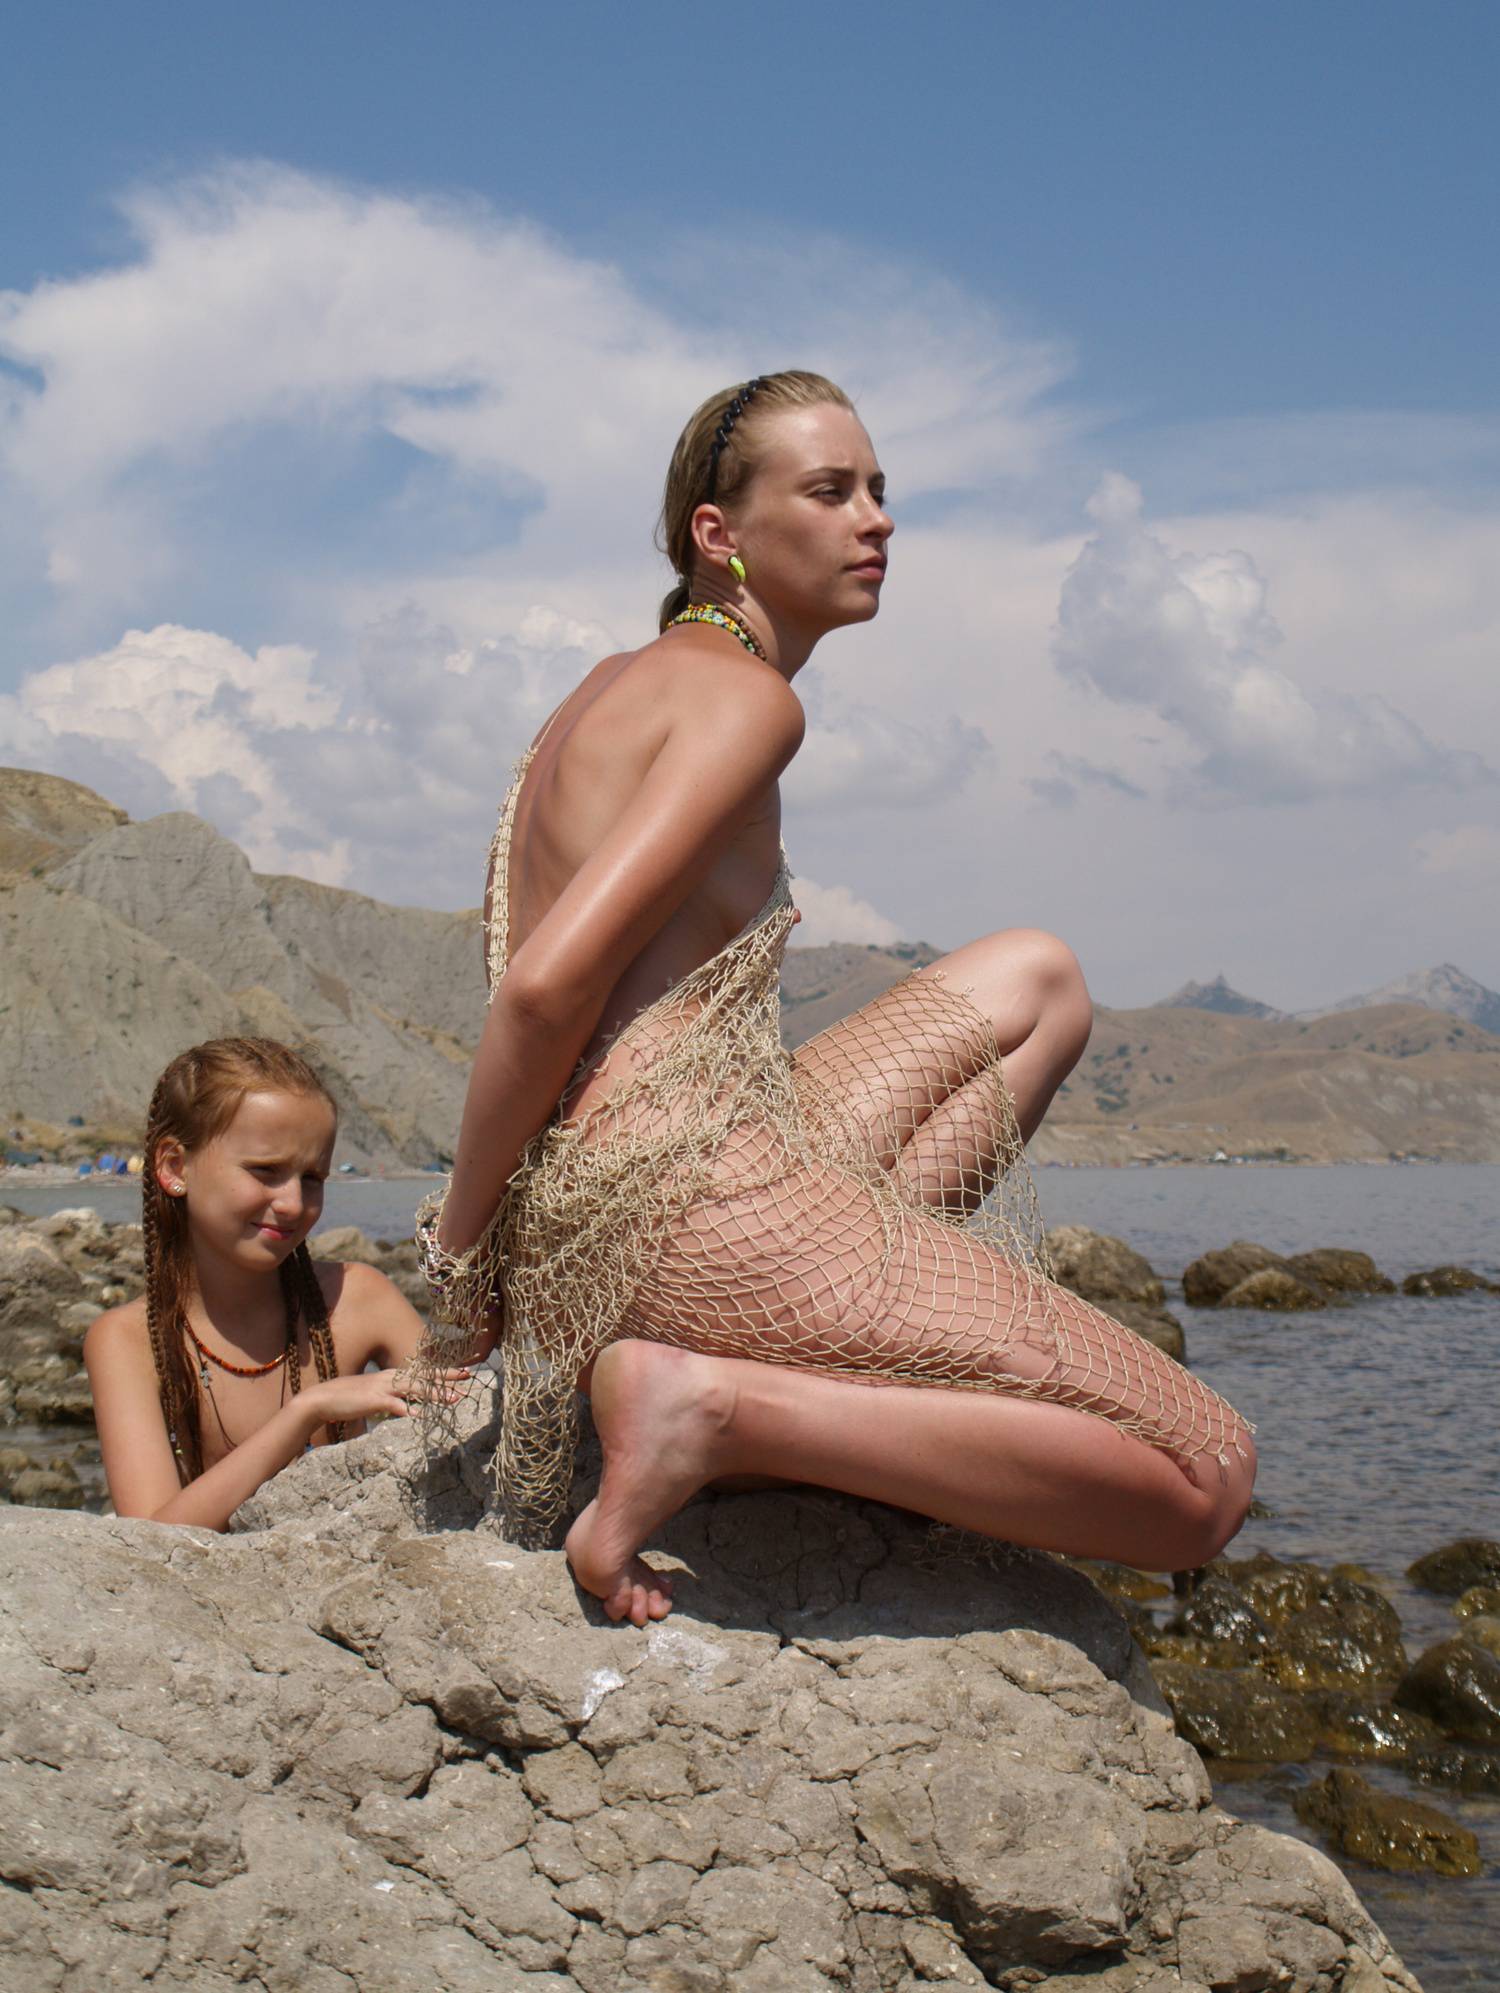 Naturist Model and Daughter - 2